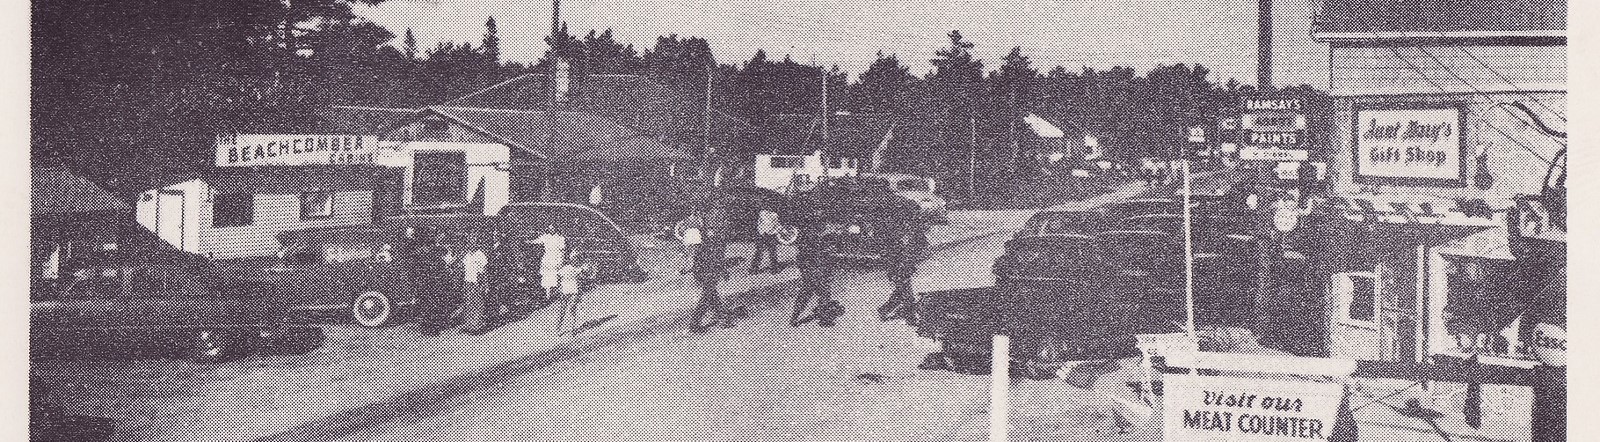 Photo of Sauble Business Section Circa 1949-55